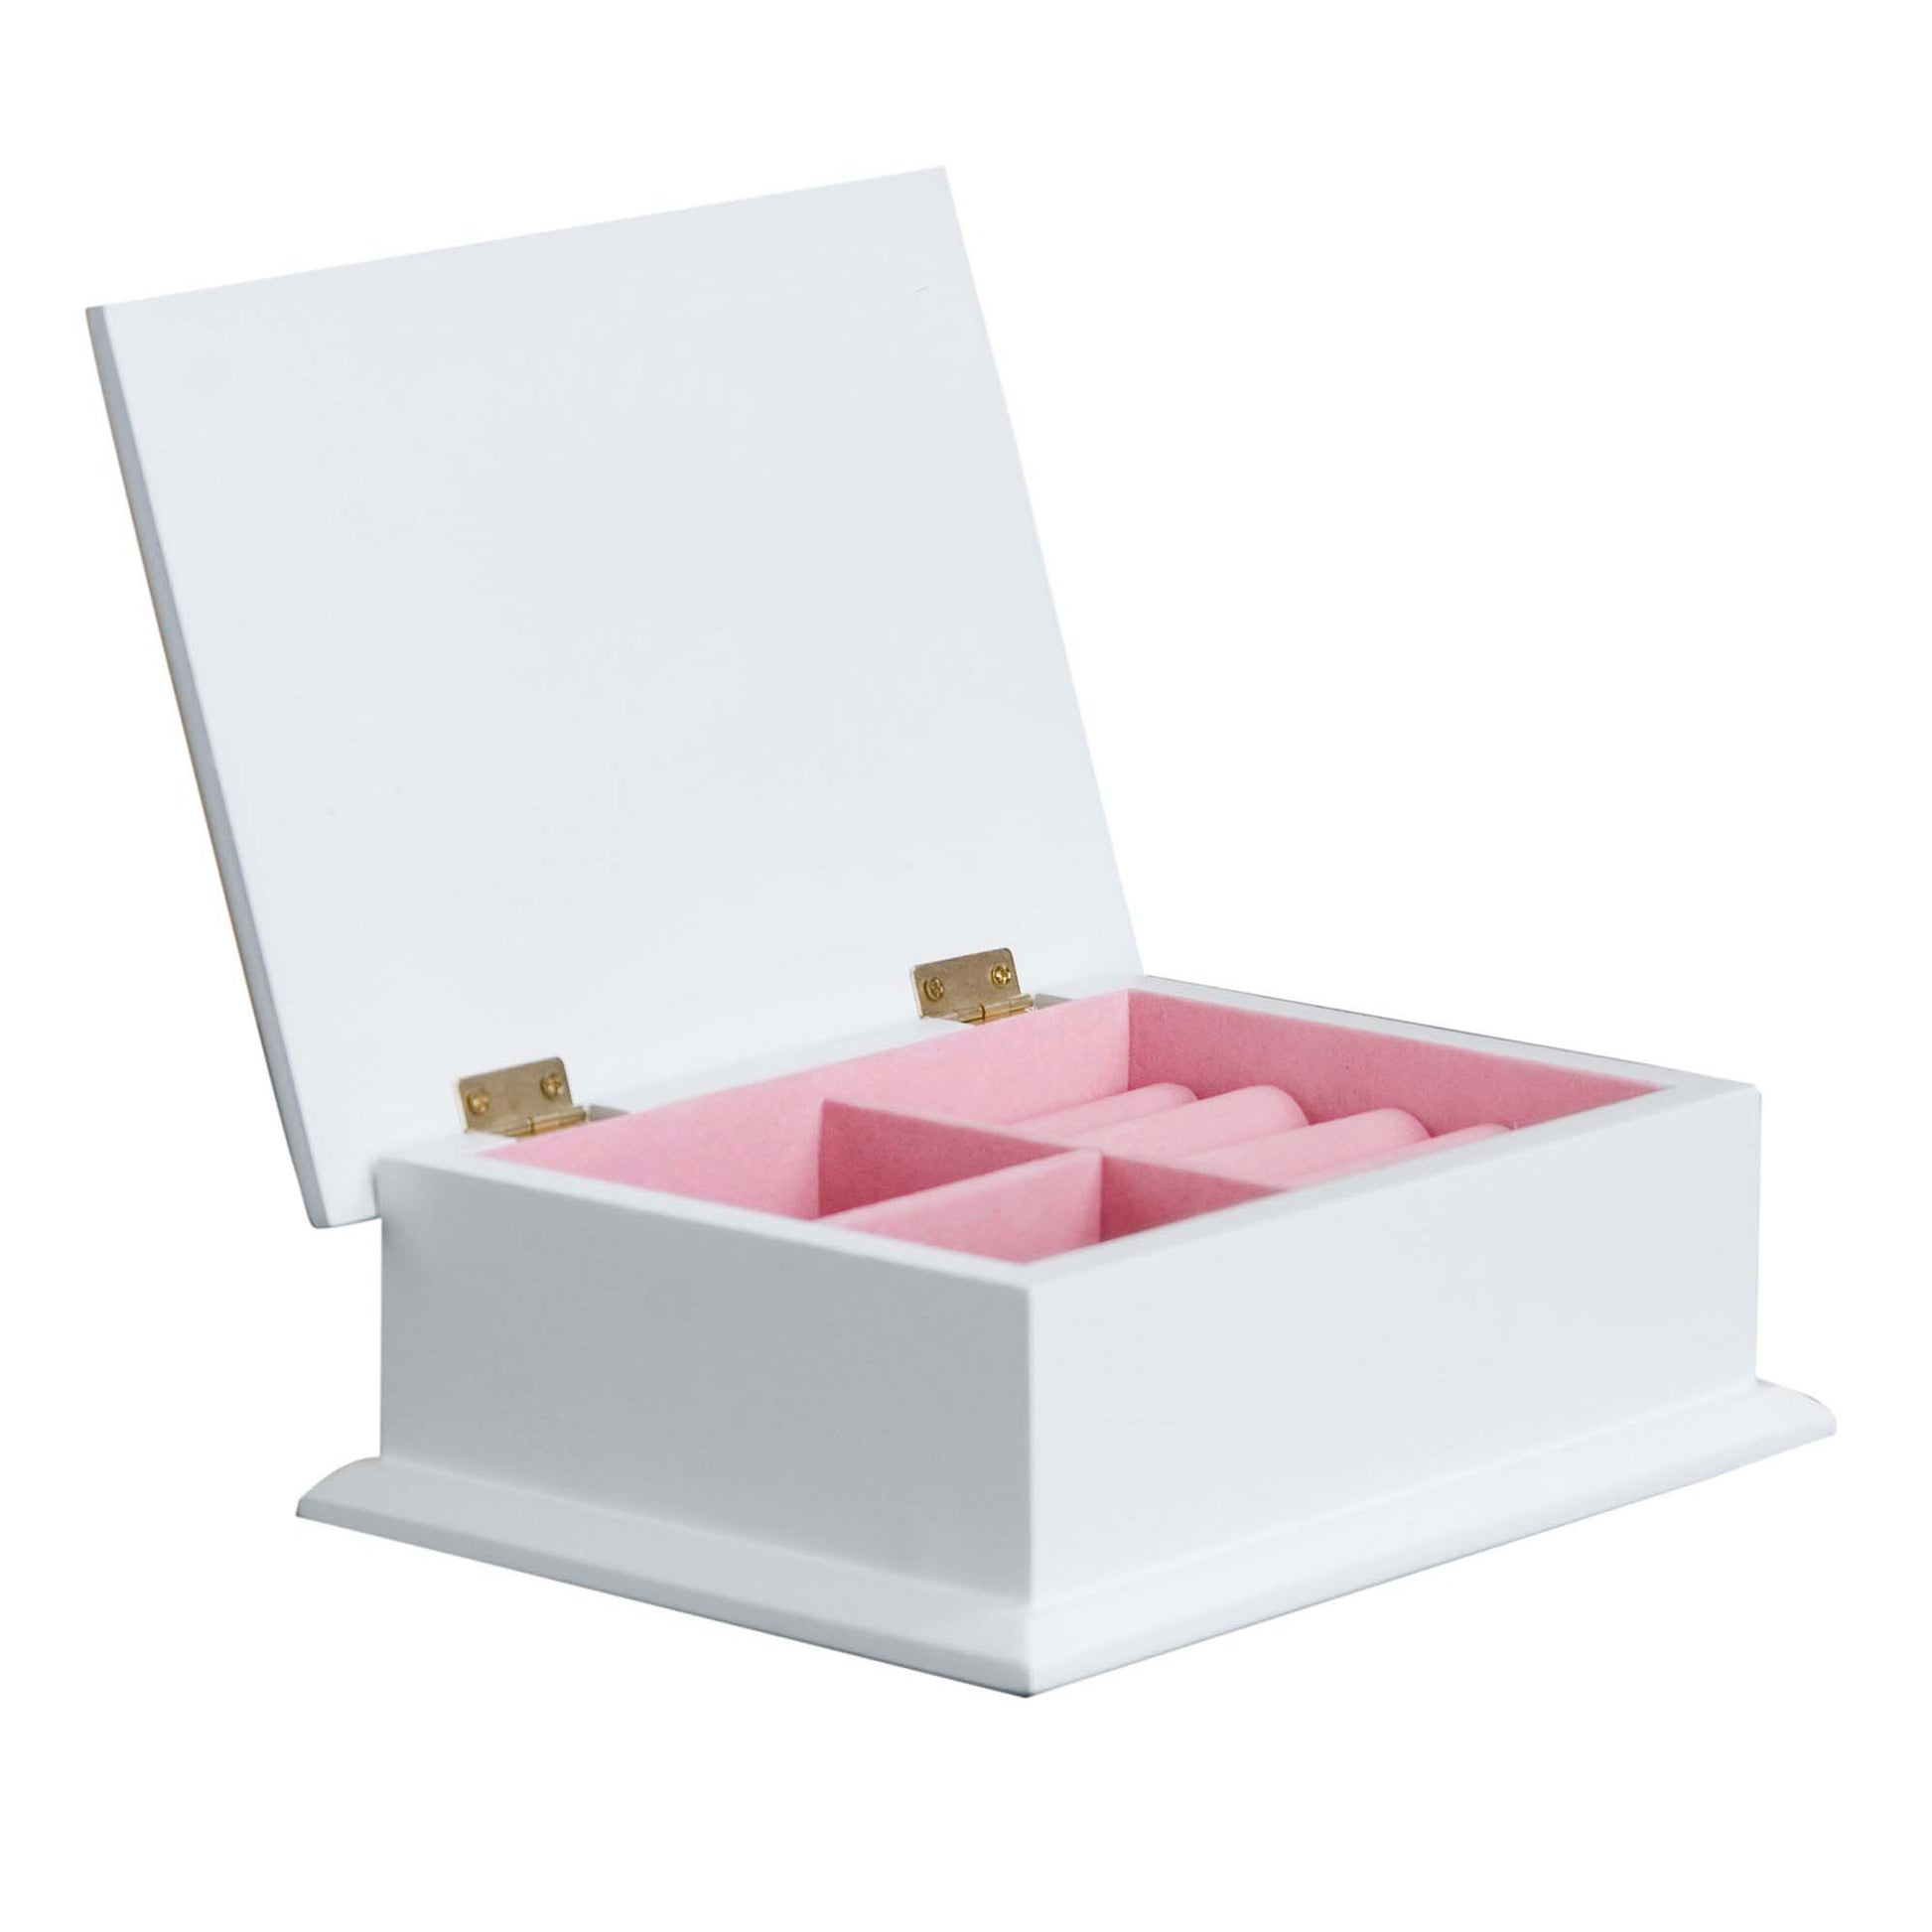 Personalized Lift Top Jewelry Box with Stemmed Flowers design